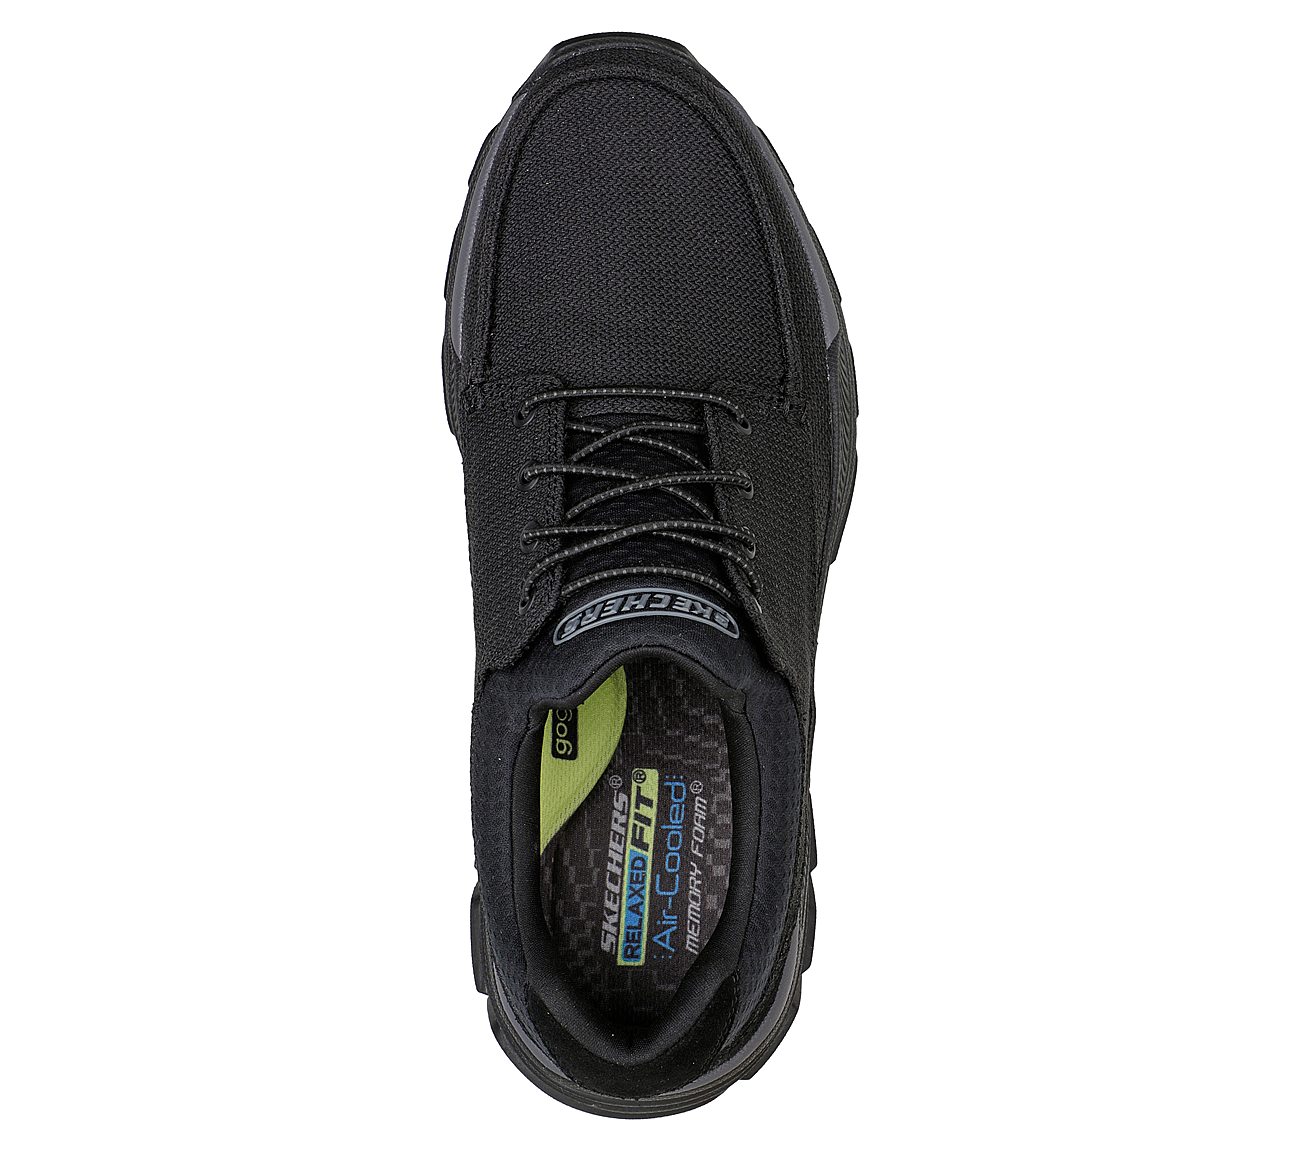 RESPECTED - SARTELL, BBBBLACK Footwear Top View